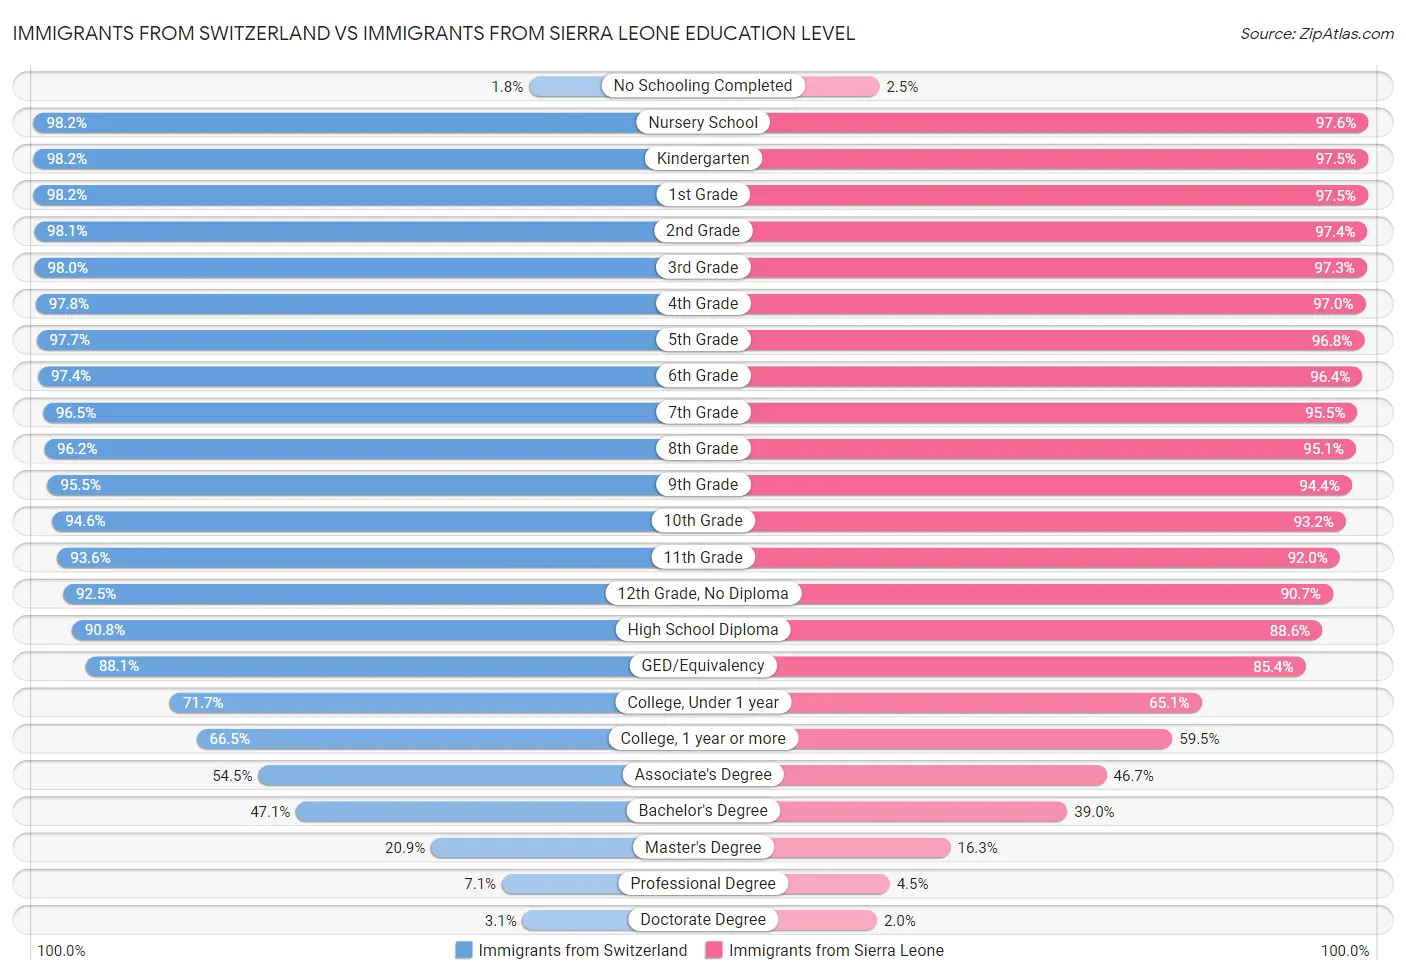 Immigrants from Switzerland vs Immigrants from Sierra Leone Education Level